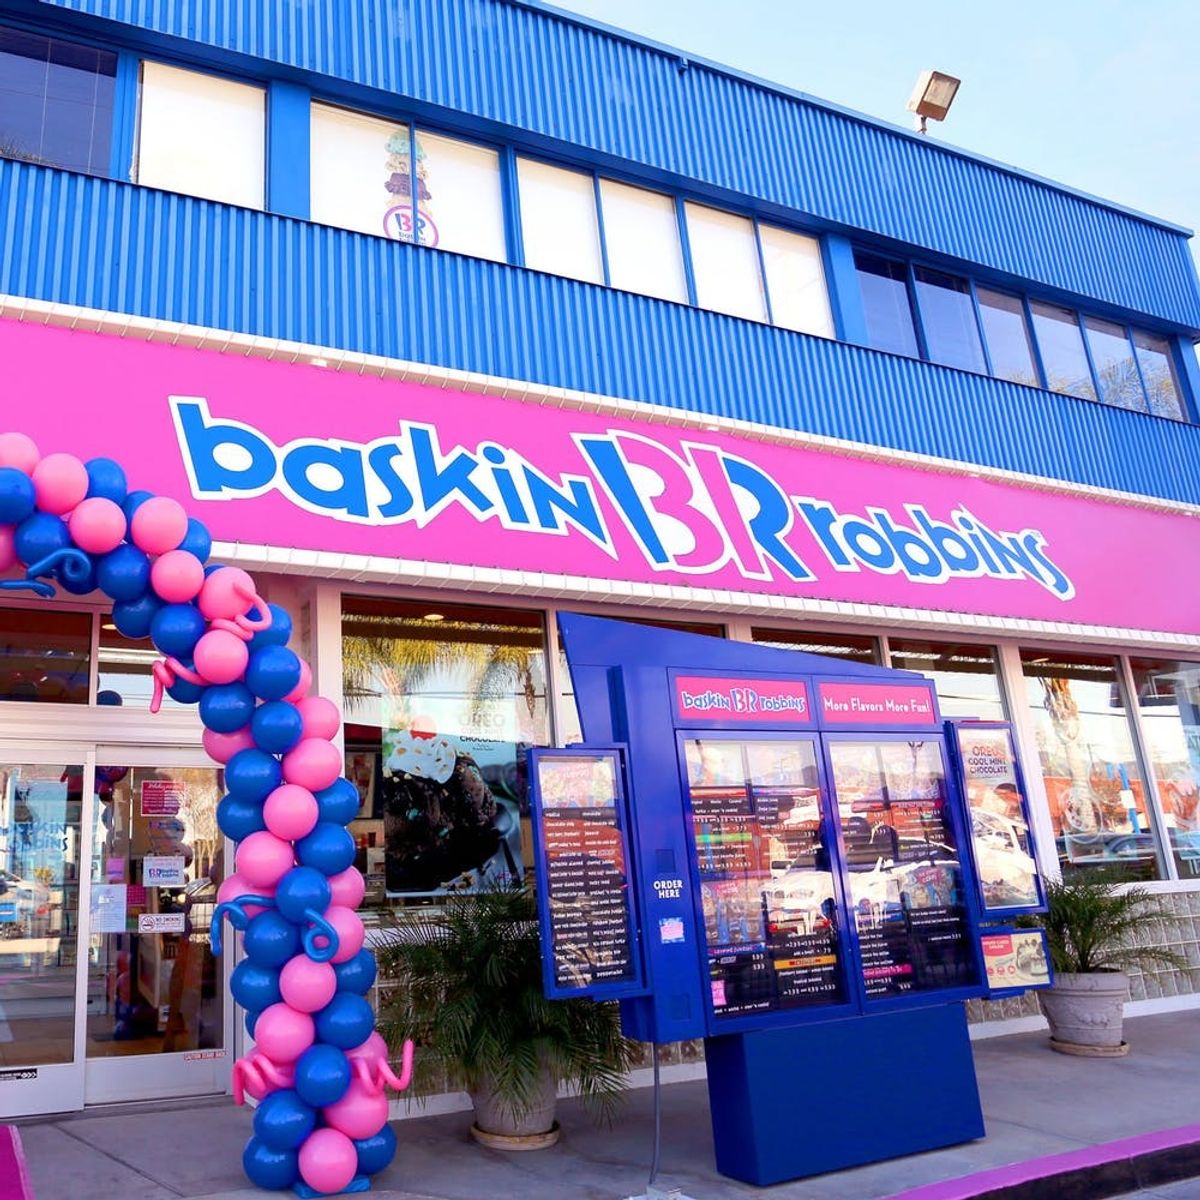 Baskin-Robbins Just Made Our Summer by Announcing That They Now Deliver